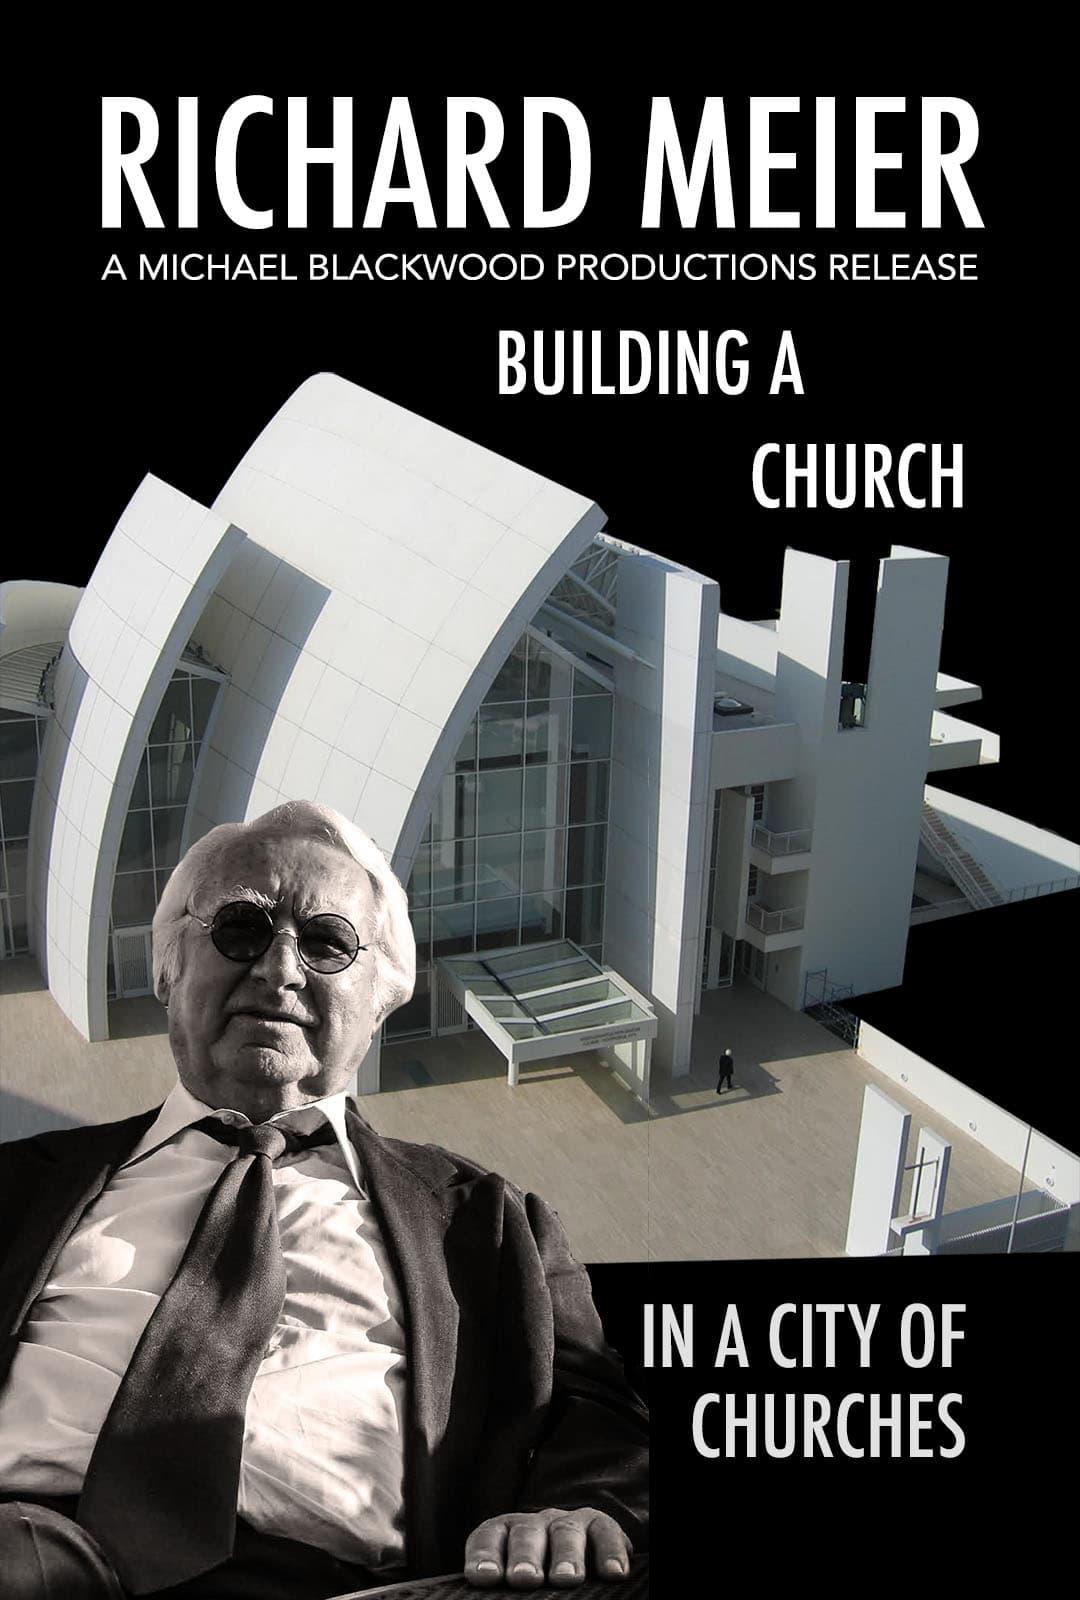 Richard Meier in Rome Building a Church in the City of Churches poster